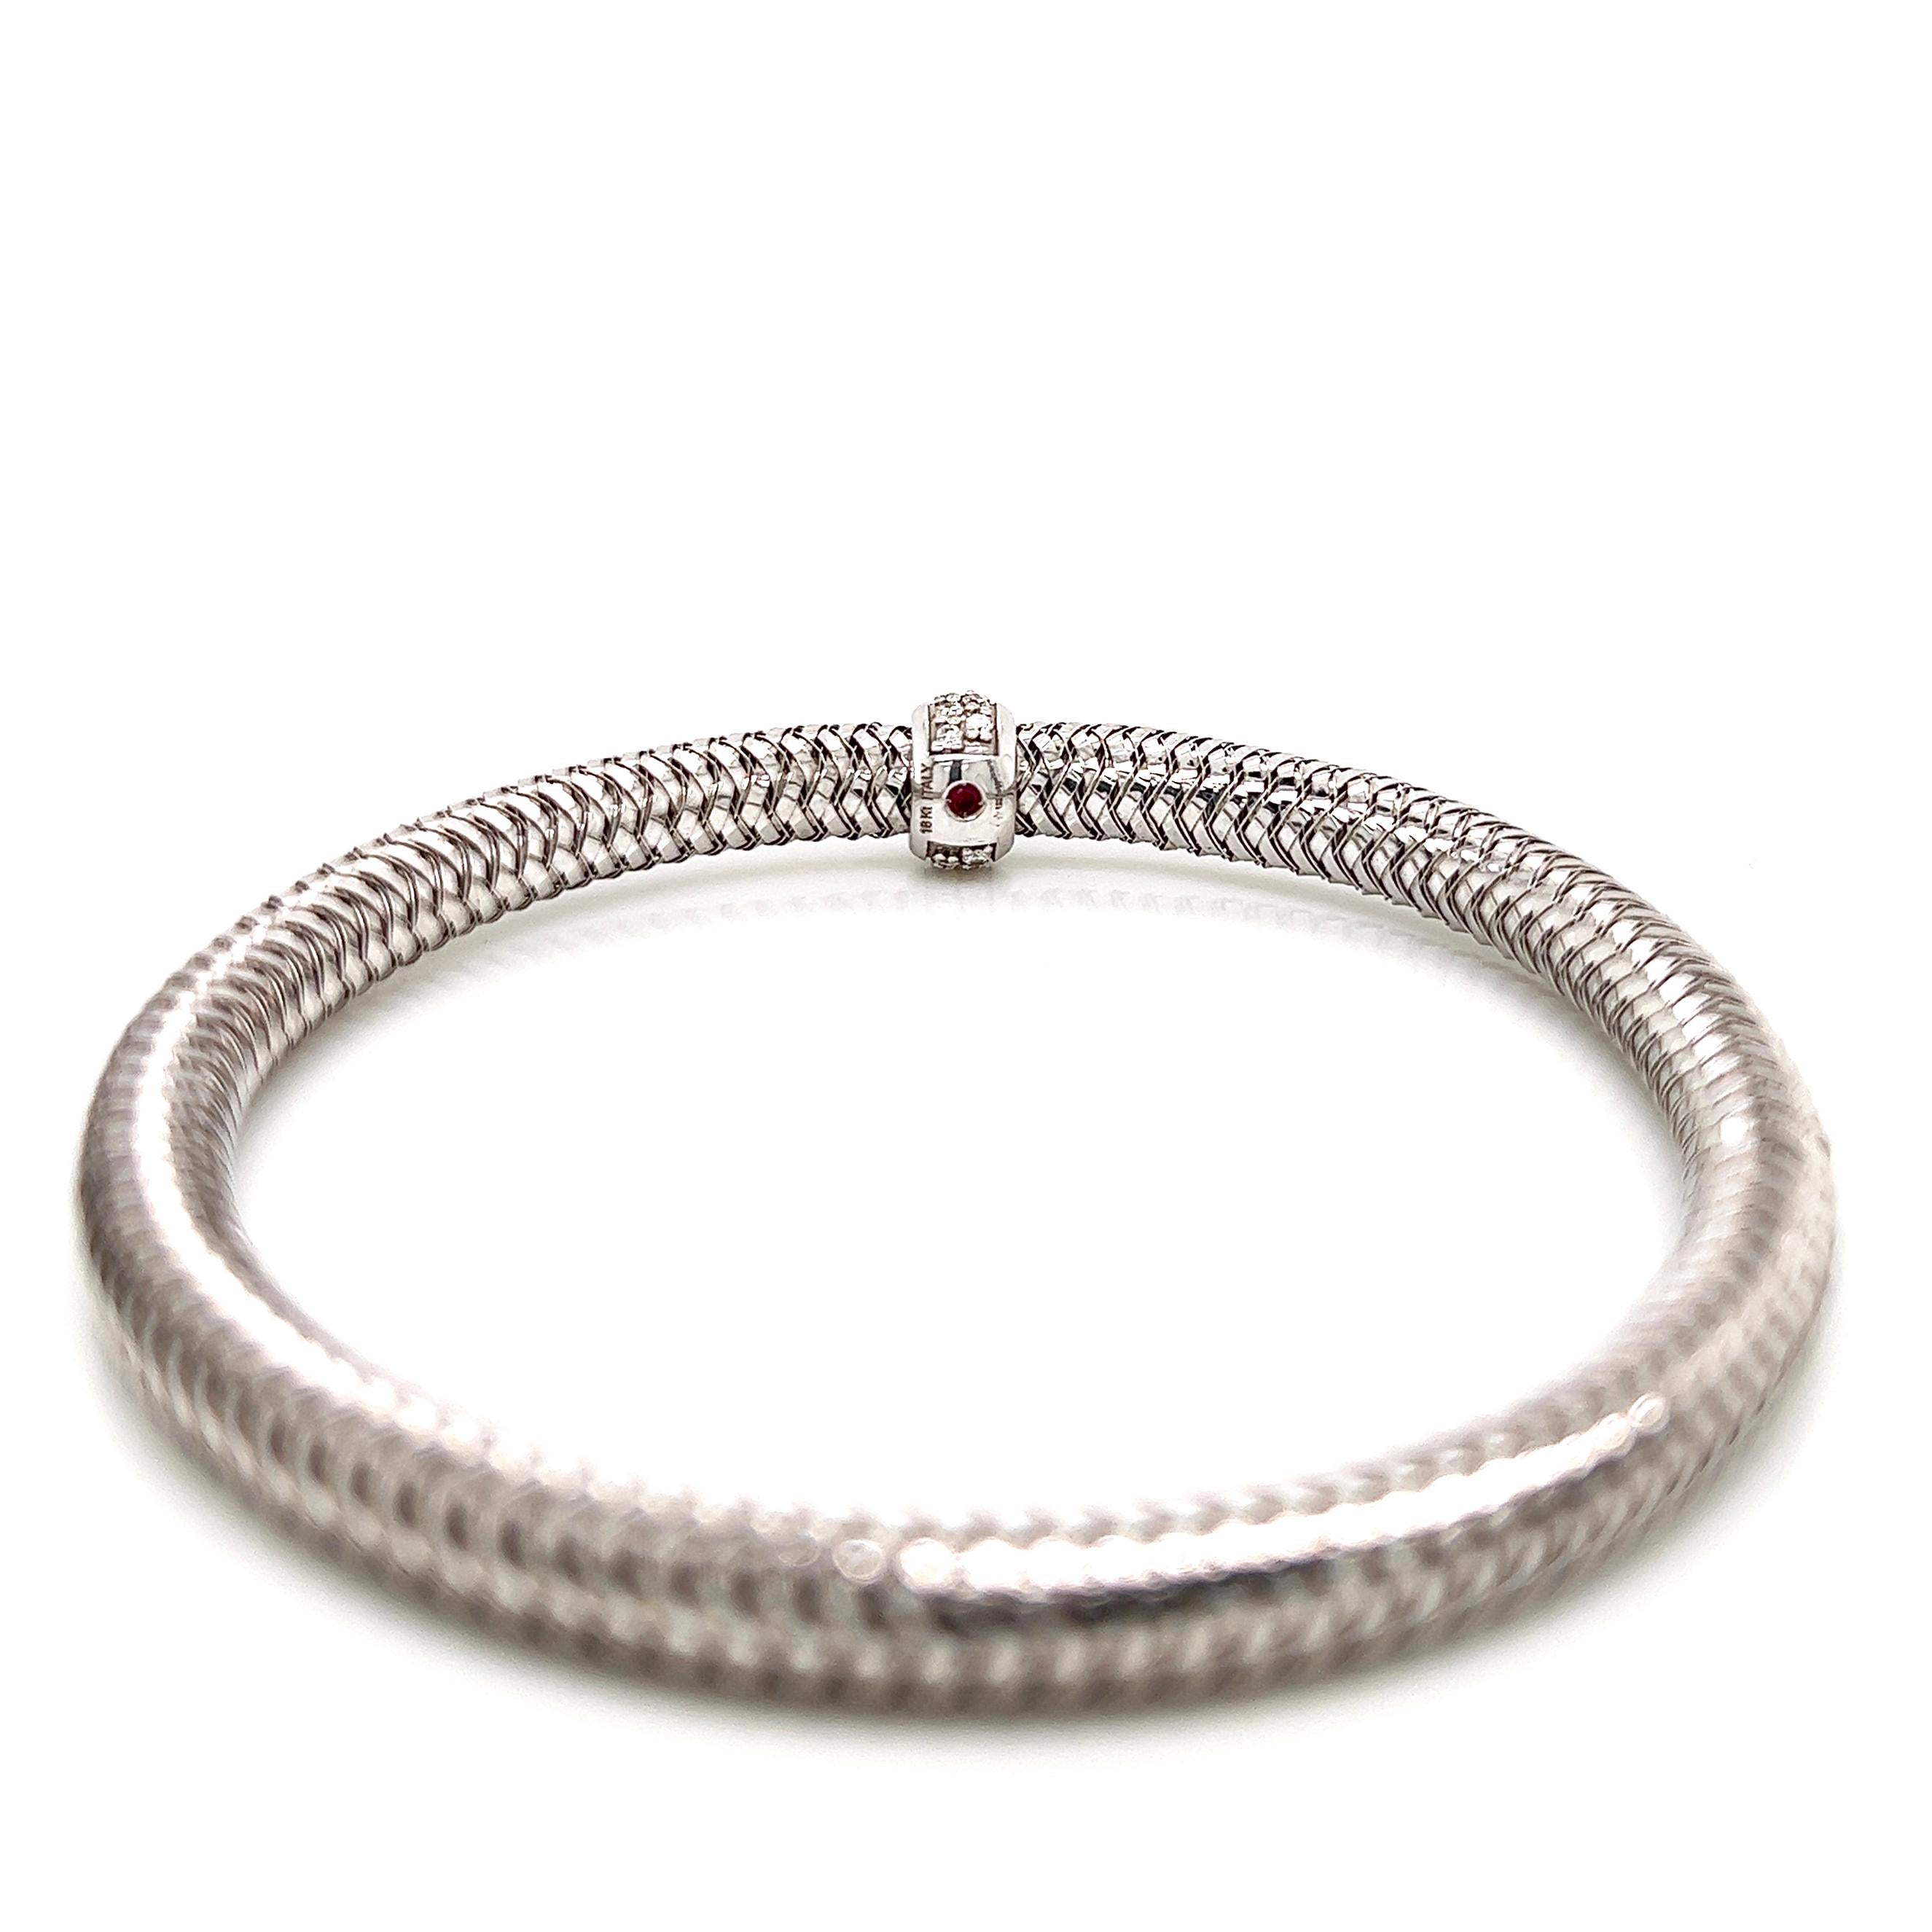 Roberto Coin 18K White Gold Primavera Diamond Station Flexible Bracelet.
Size is adjustable up to 7.25 inches
Approx. .22 total carat weight of natural Diamonds